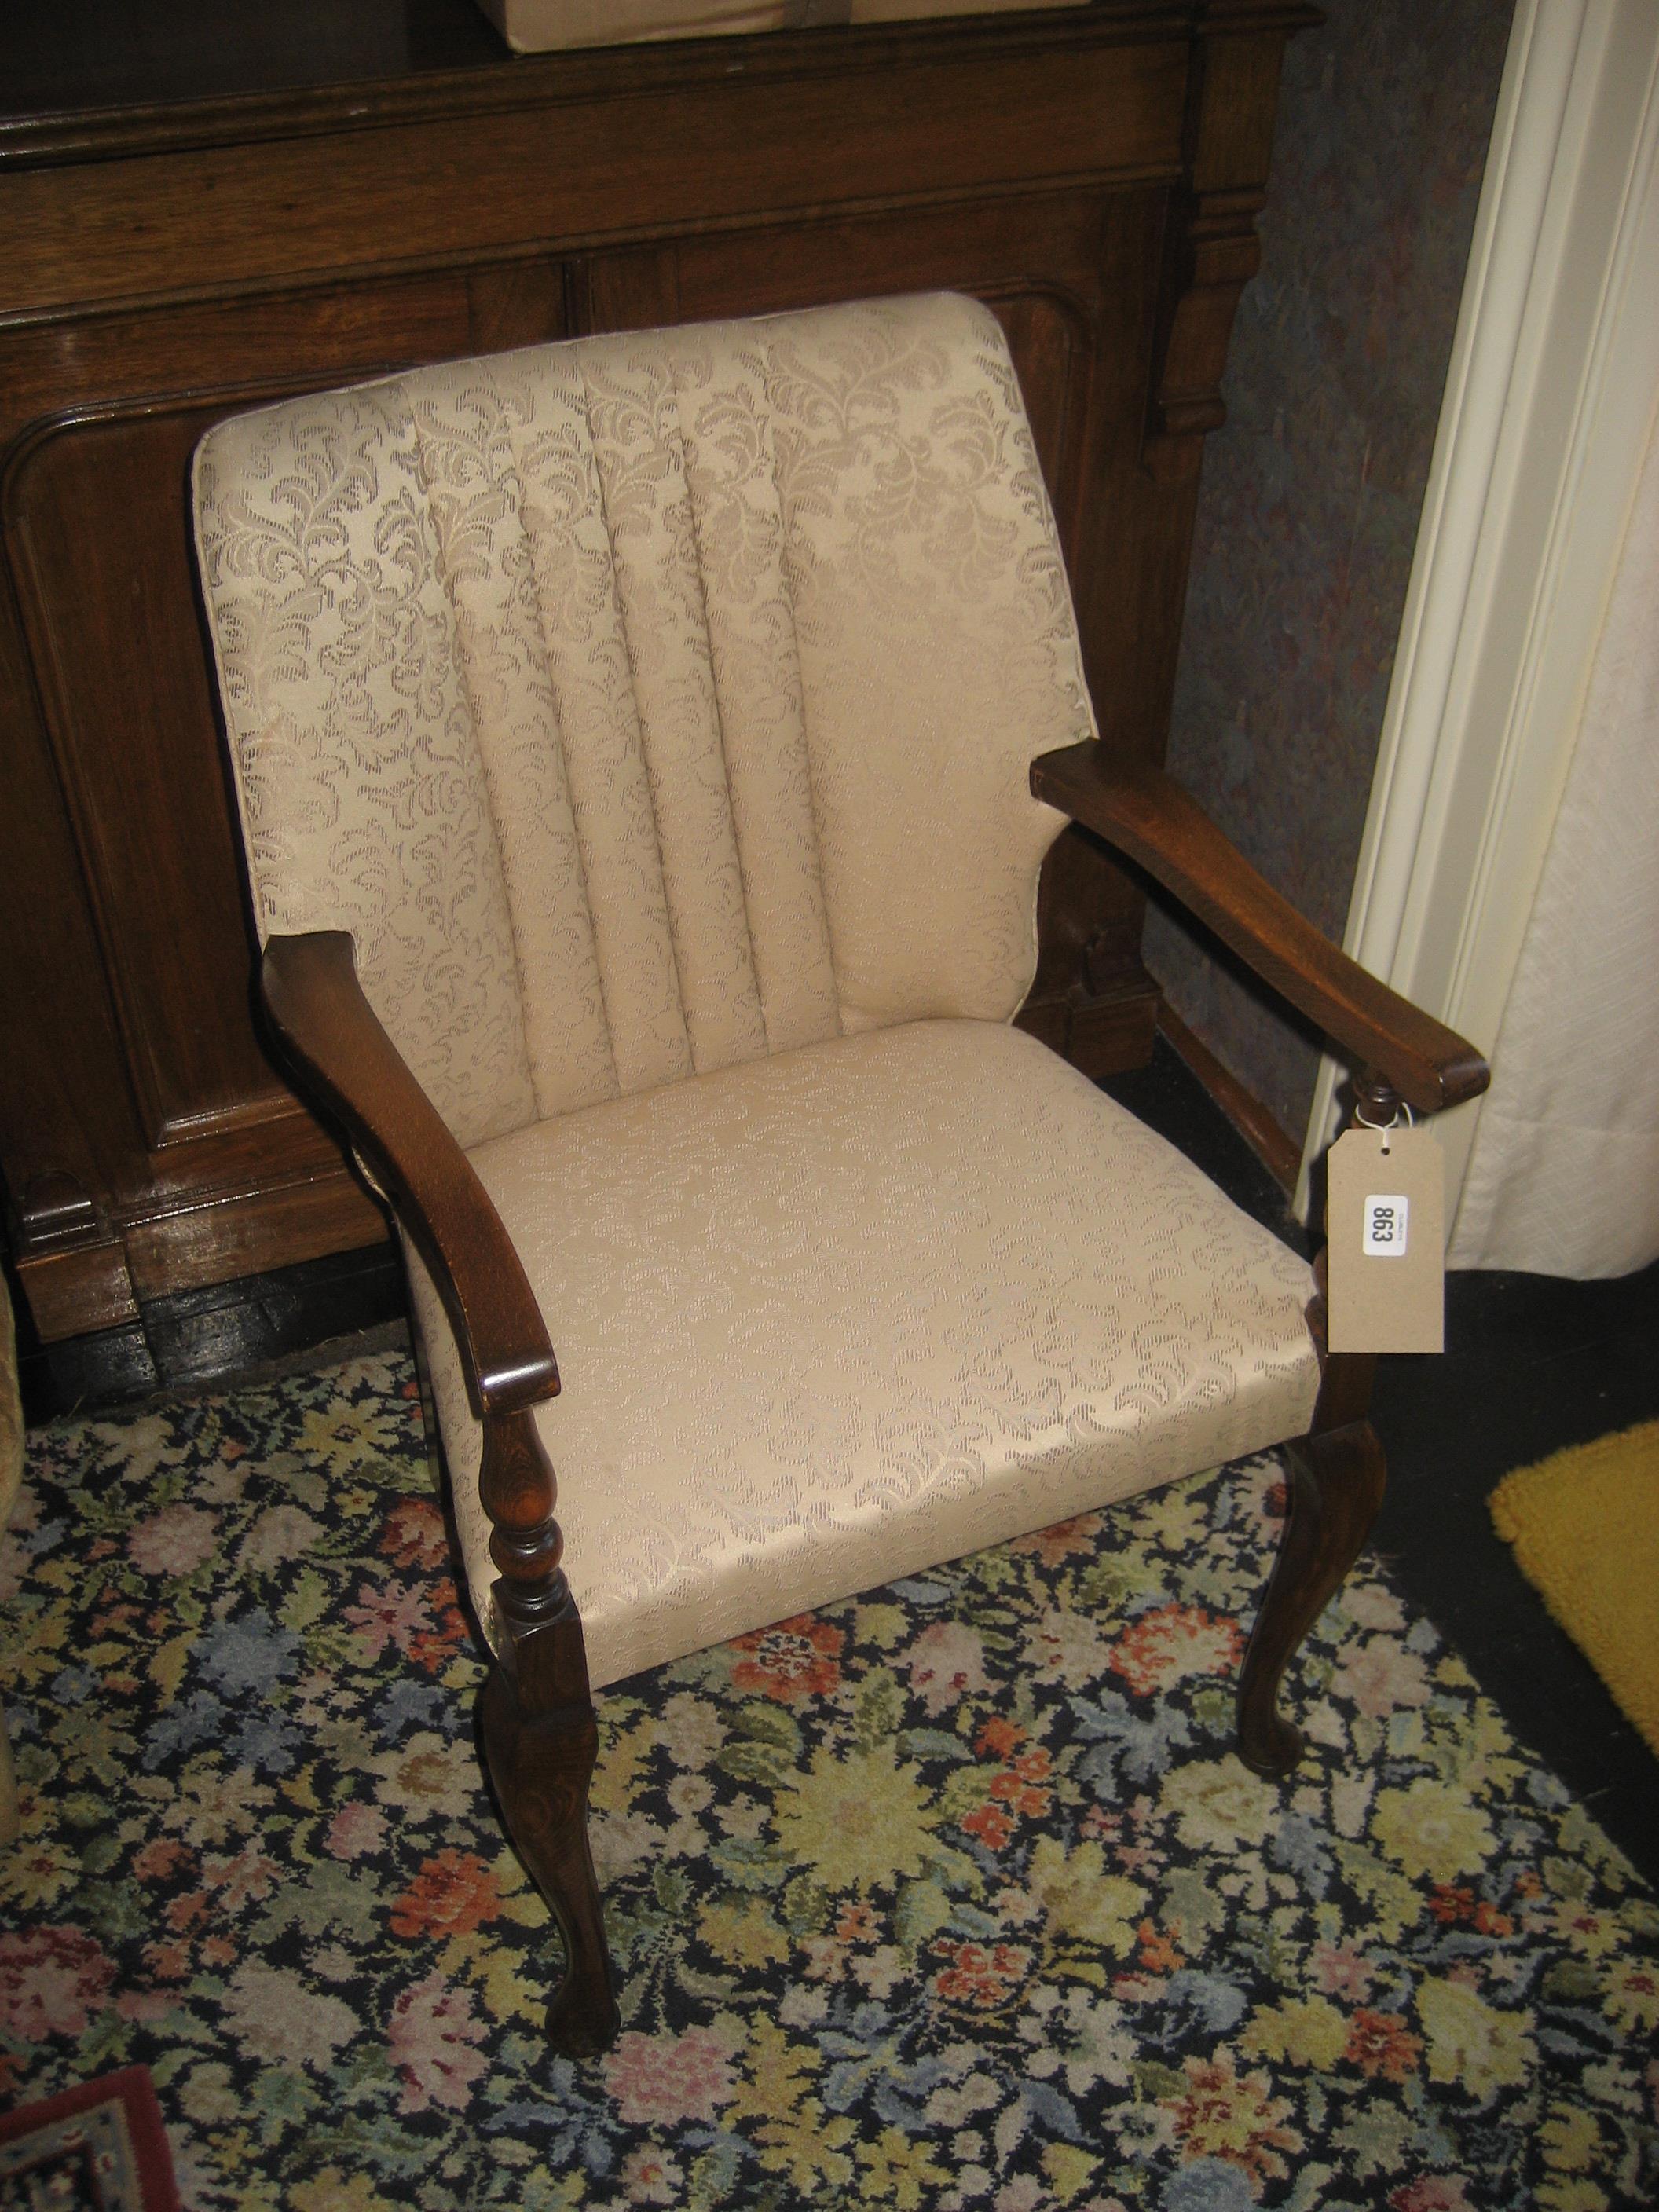 A 20th century Queen Anne type upholstered chair.